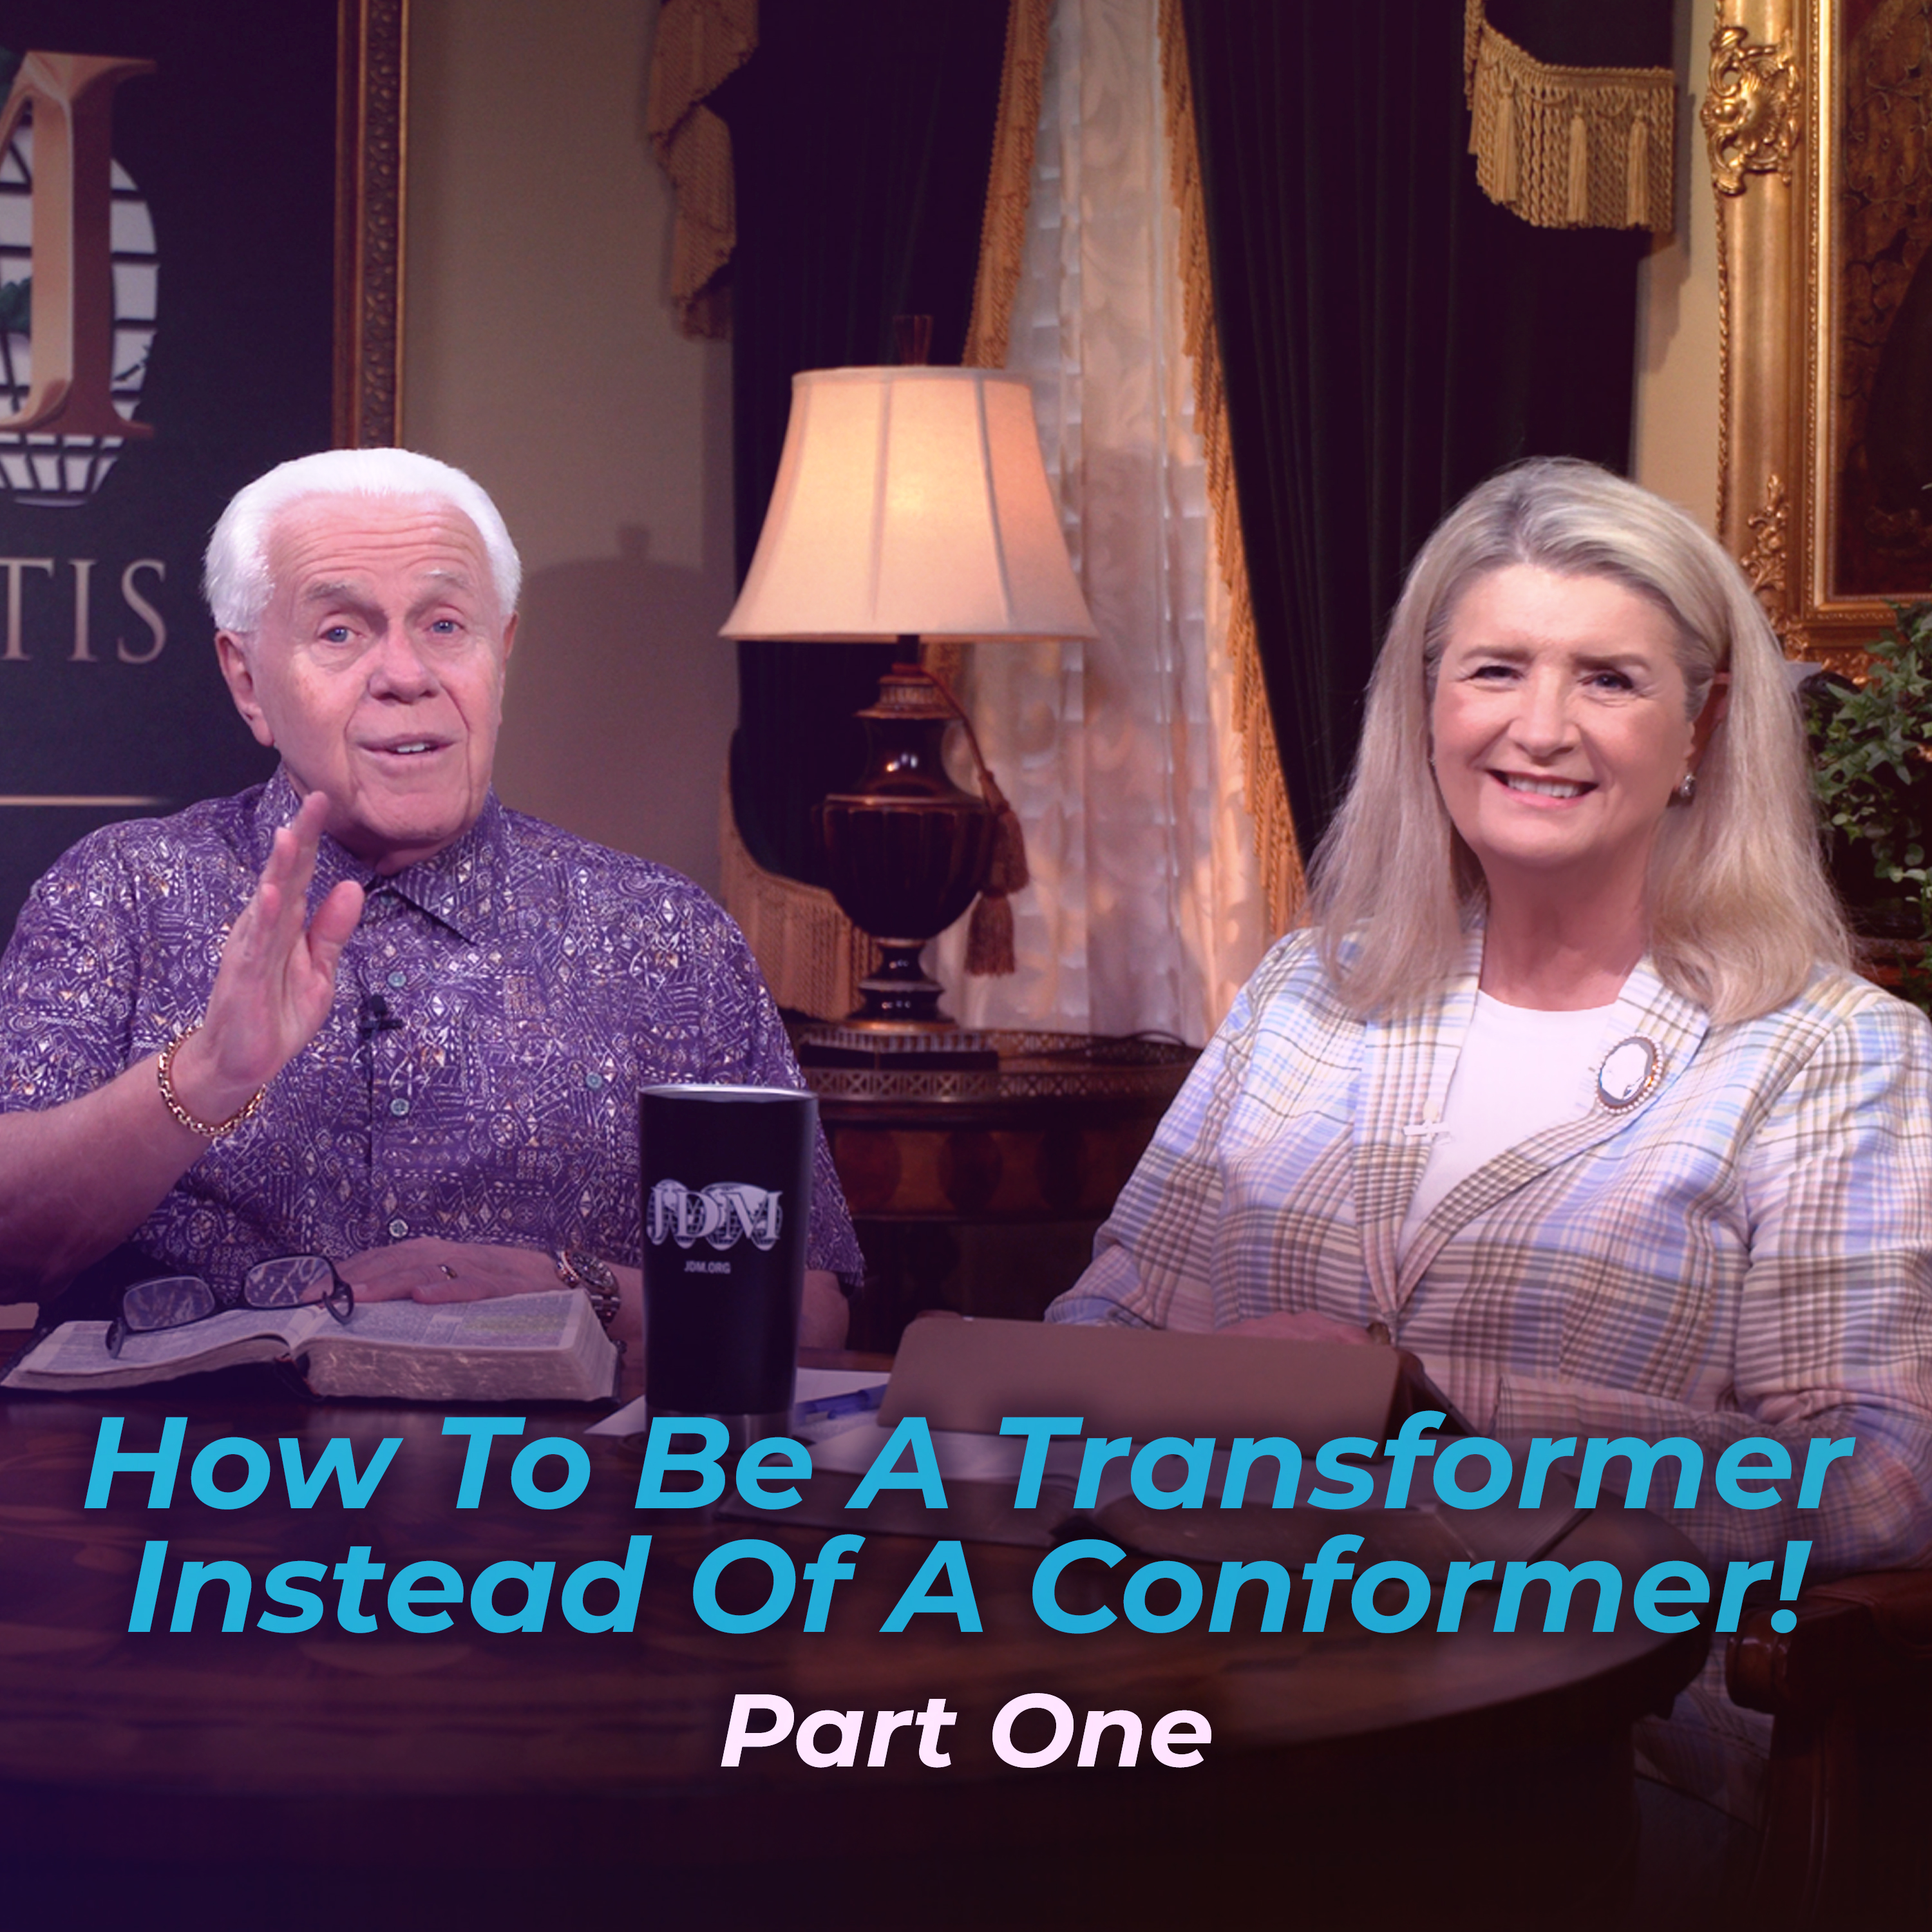 How To Be A Transformer Instead Of A Conformer, Part 1